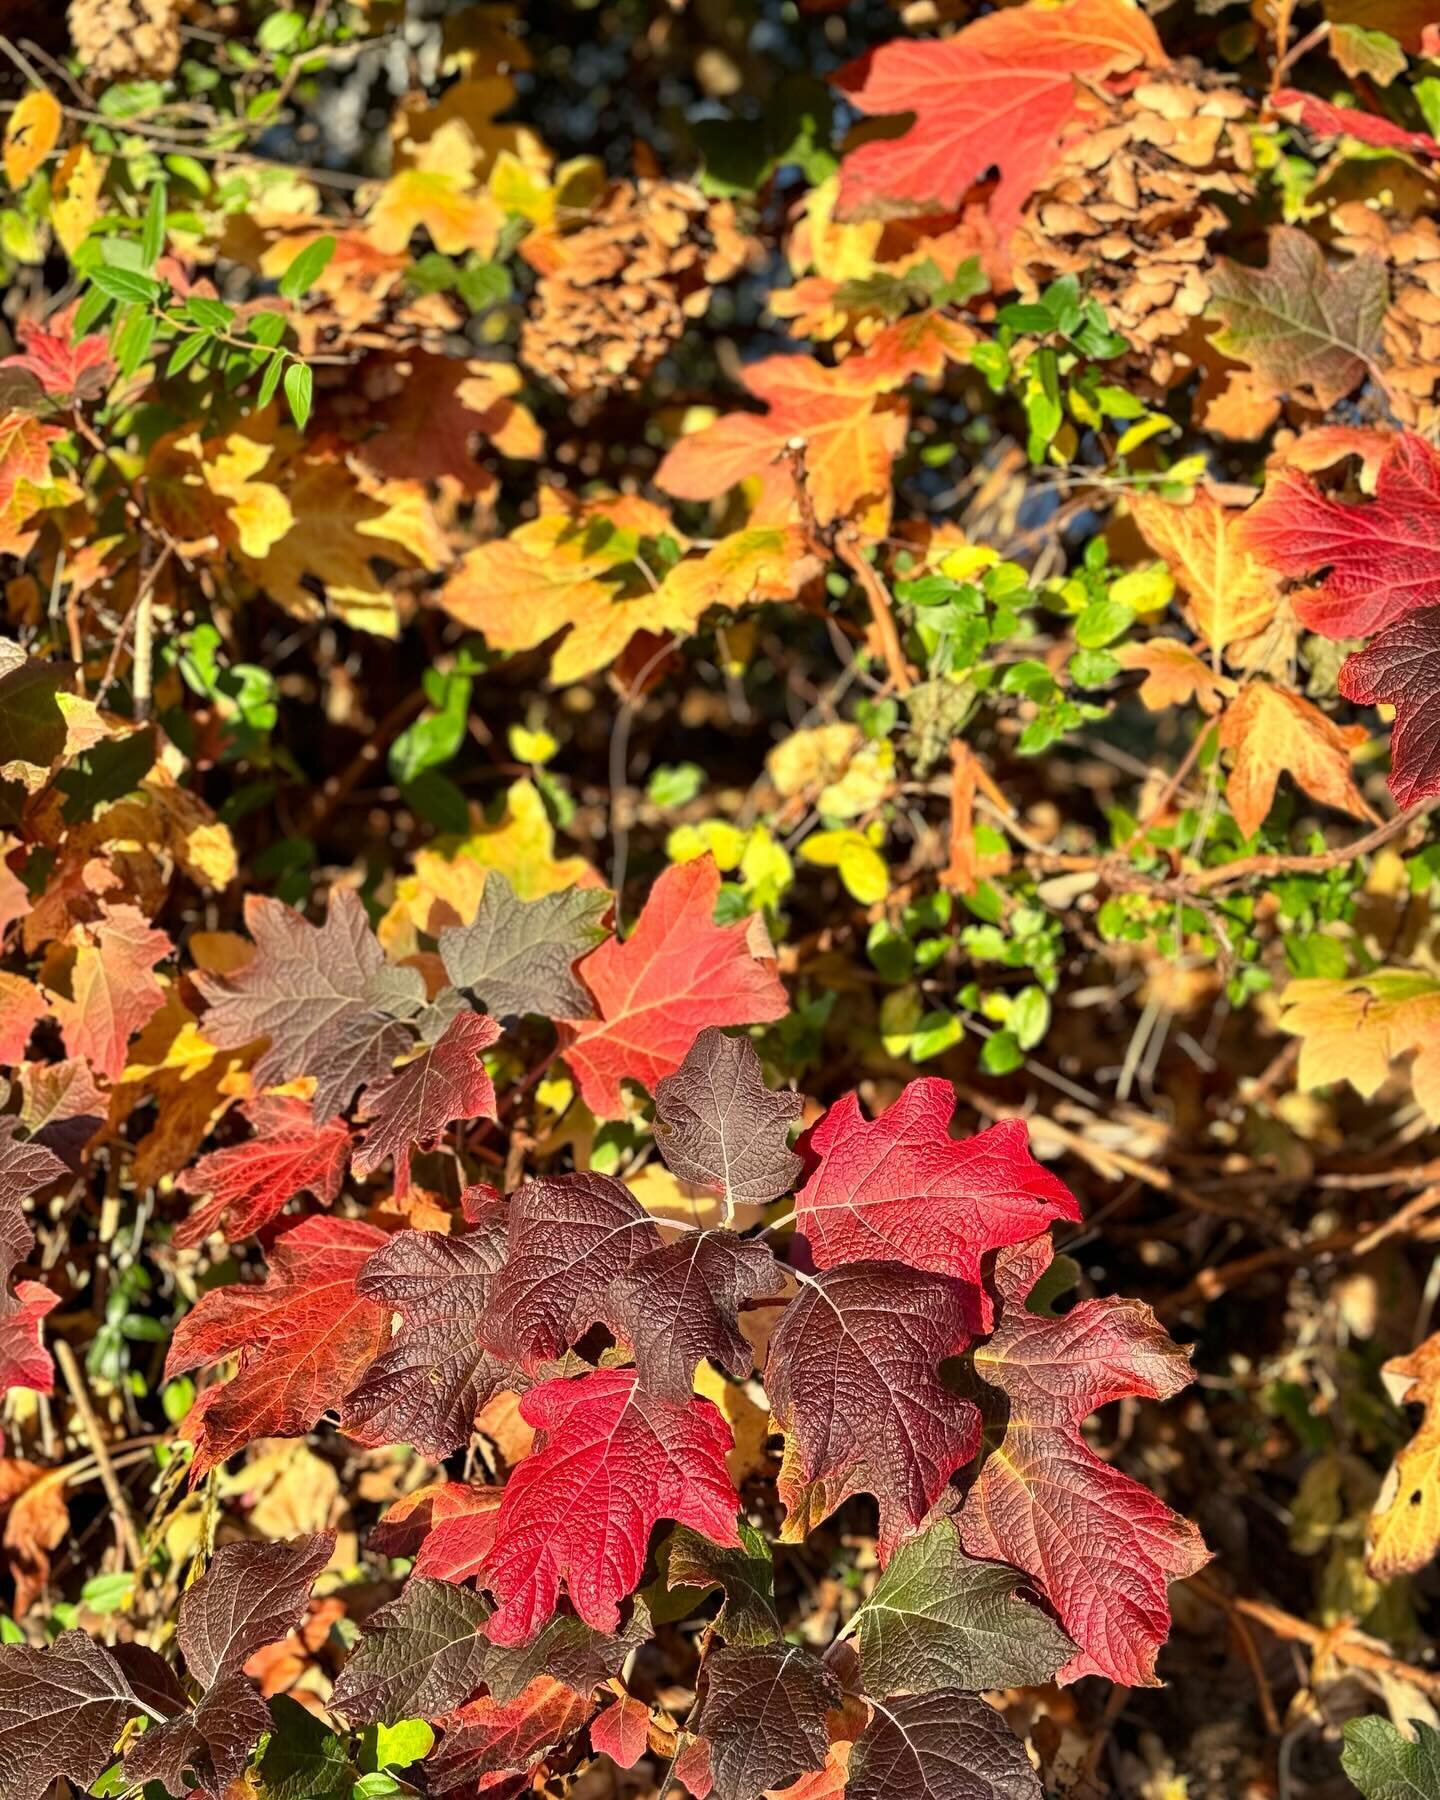 The last fall colors are showing off in the sunshine!!! #fallcolors #fallleaves #nature